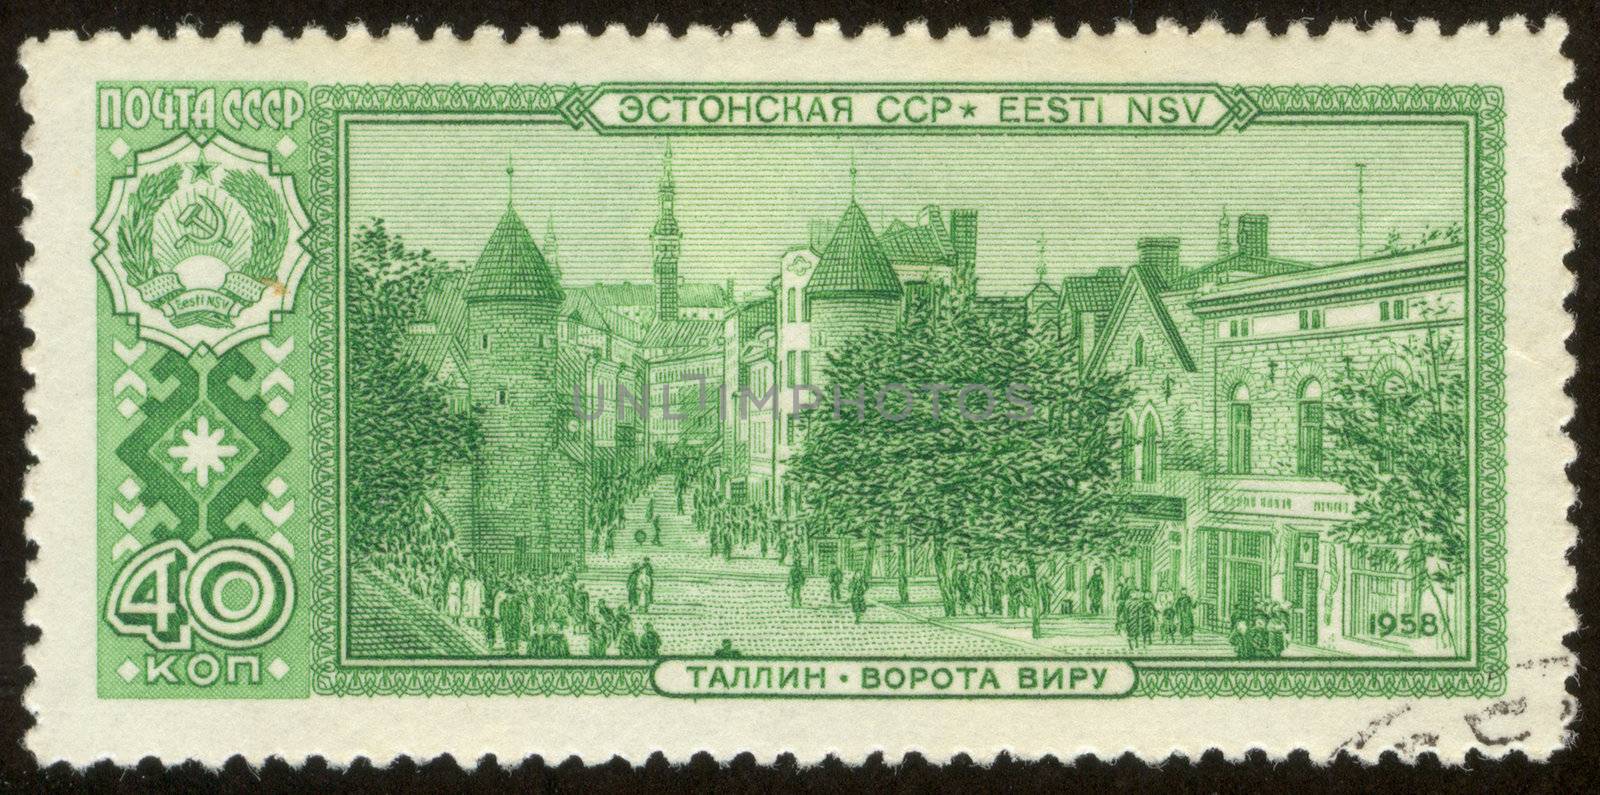 The scanned stamp. The Soviet stamp. The city of Tallinn, capital of Estonia.